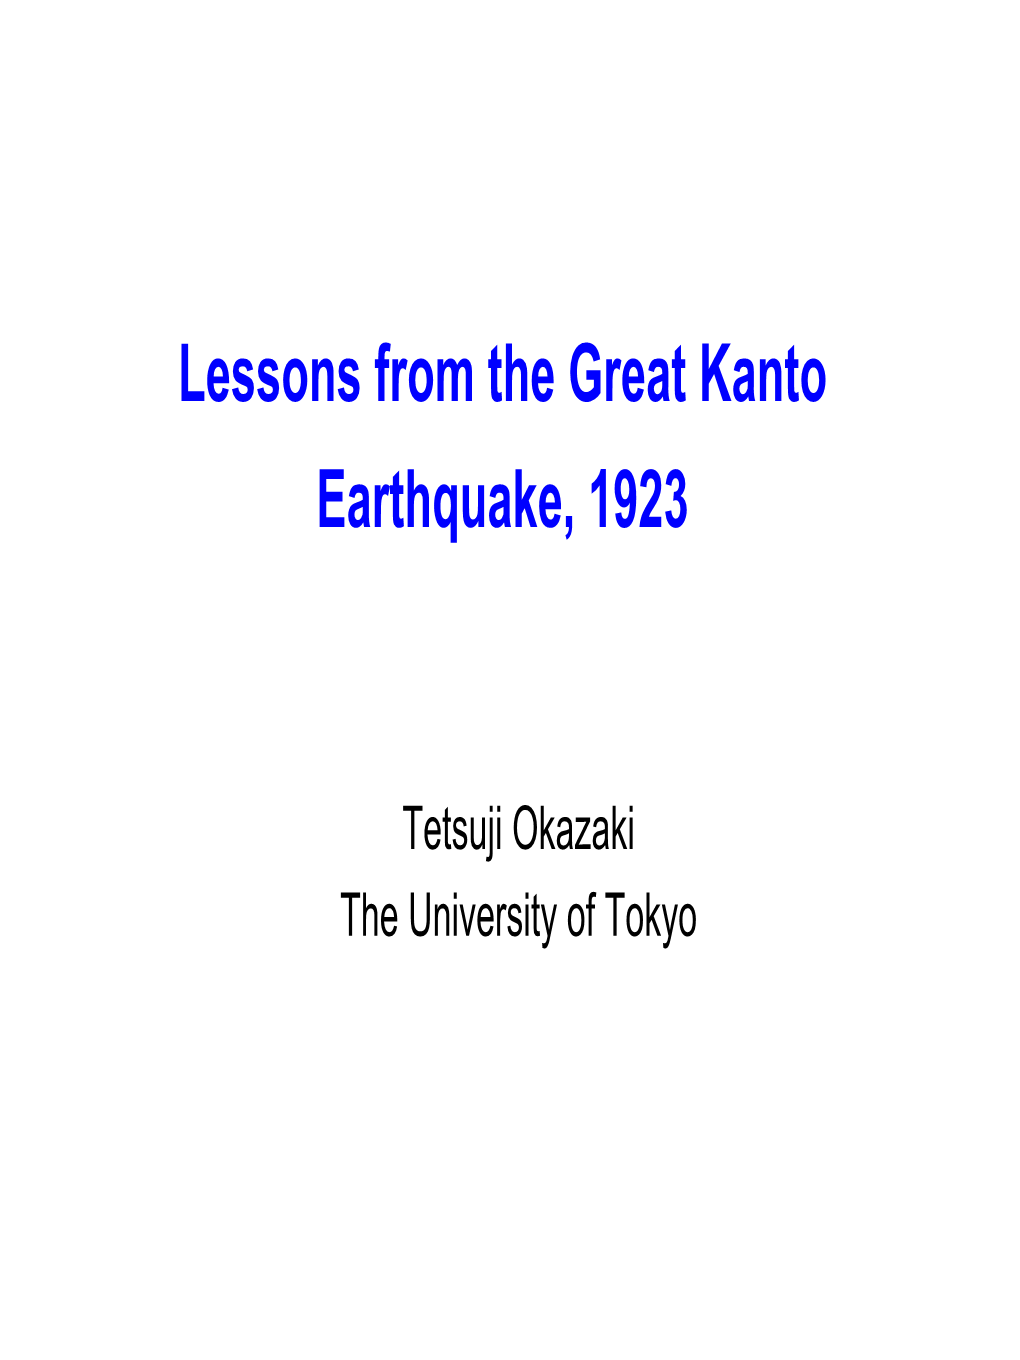 Lessons from the Great Kanto Earthquake, 1923